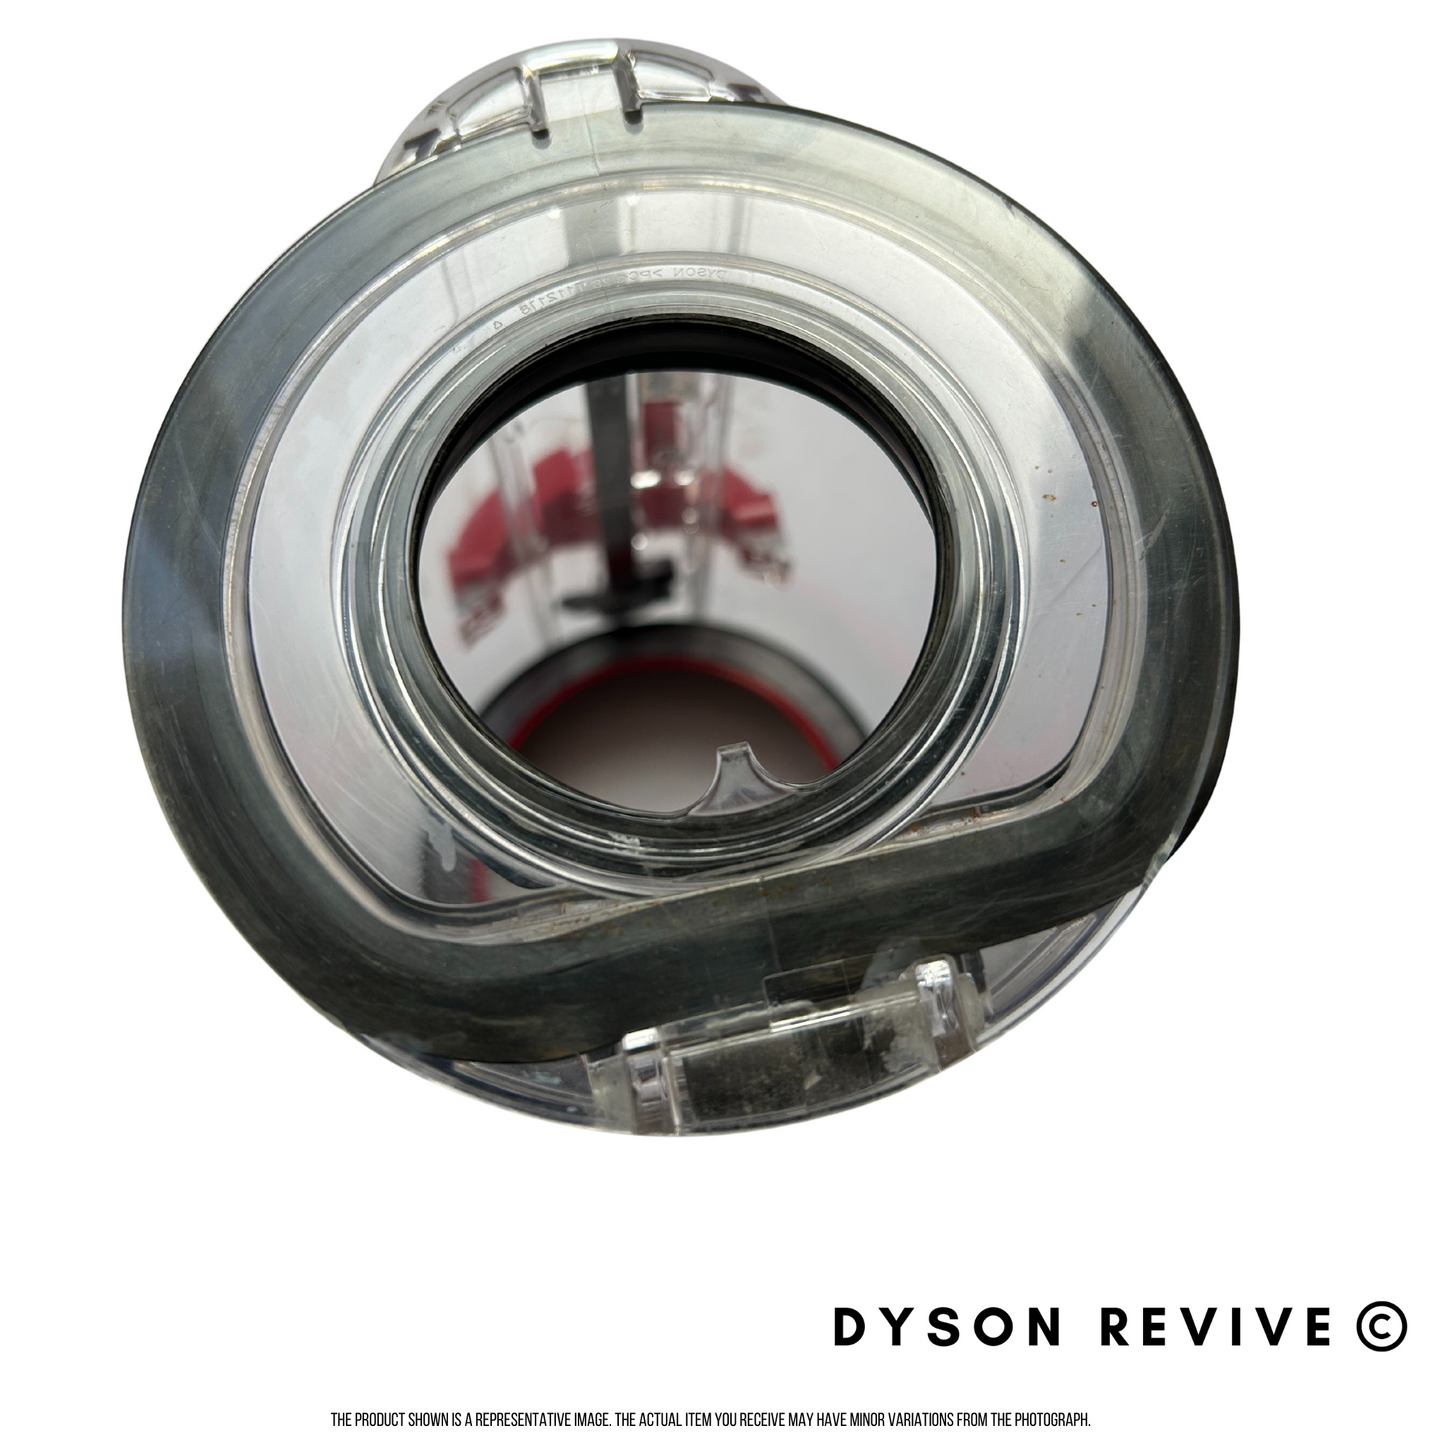 Geniune Dyson Dustbin Canister for Dyson V11 Vaccuum - Refurbished